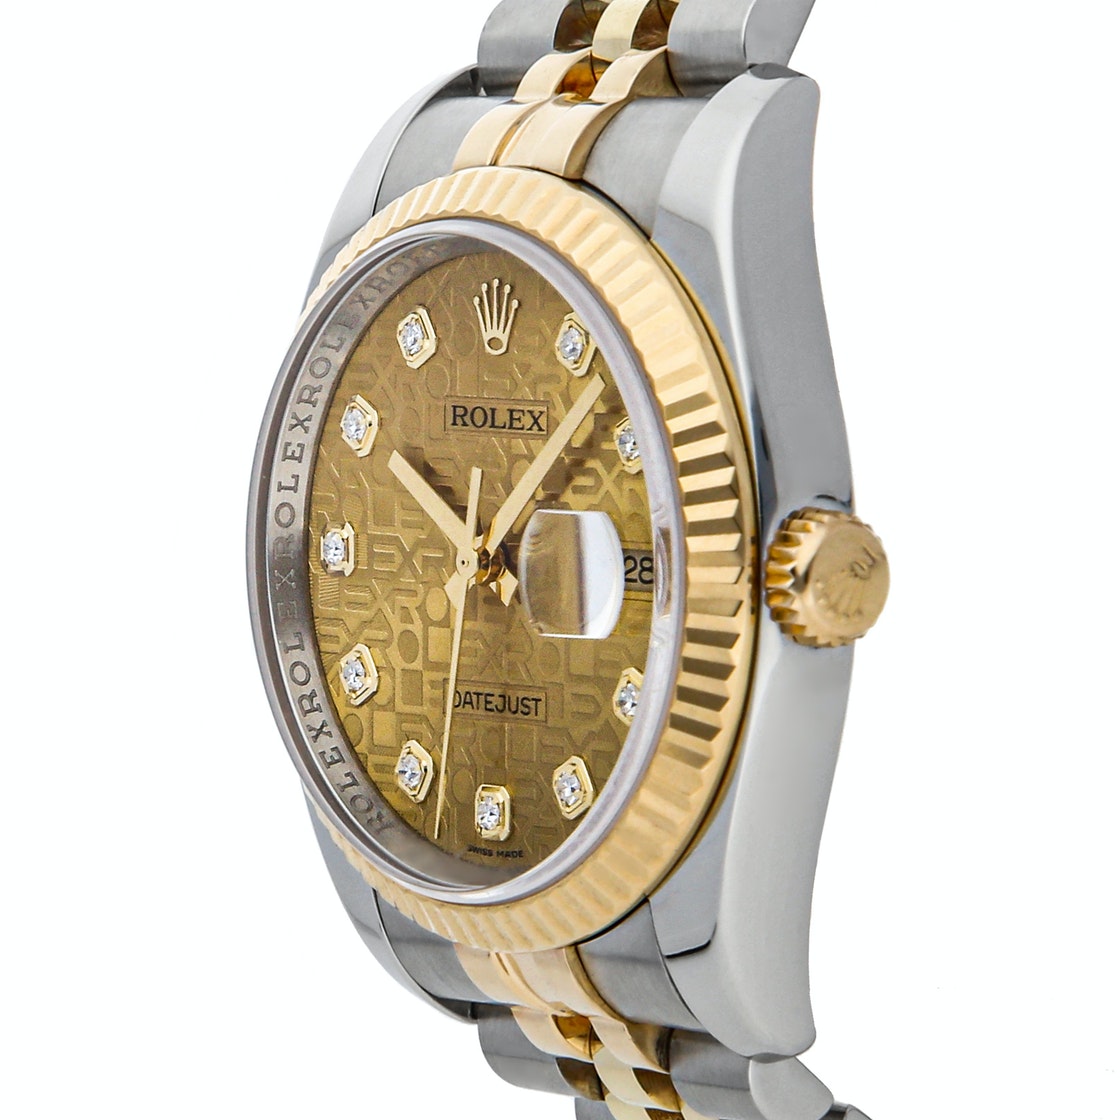 

Rolex Champagne Diamonds 18k Yellow Gold And Stainless Steel Datejust 116233 Men's Wristwatch 36 MM